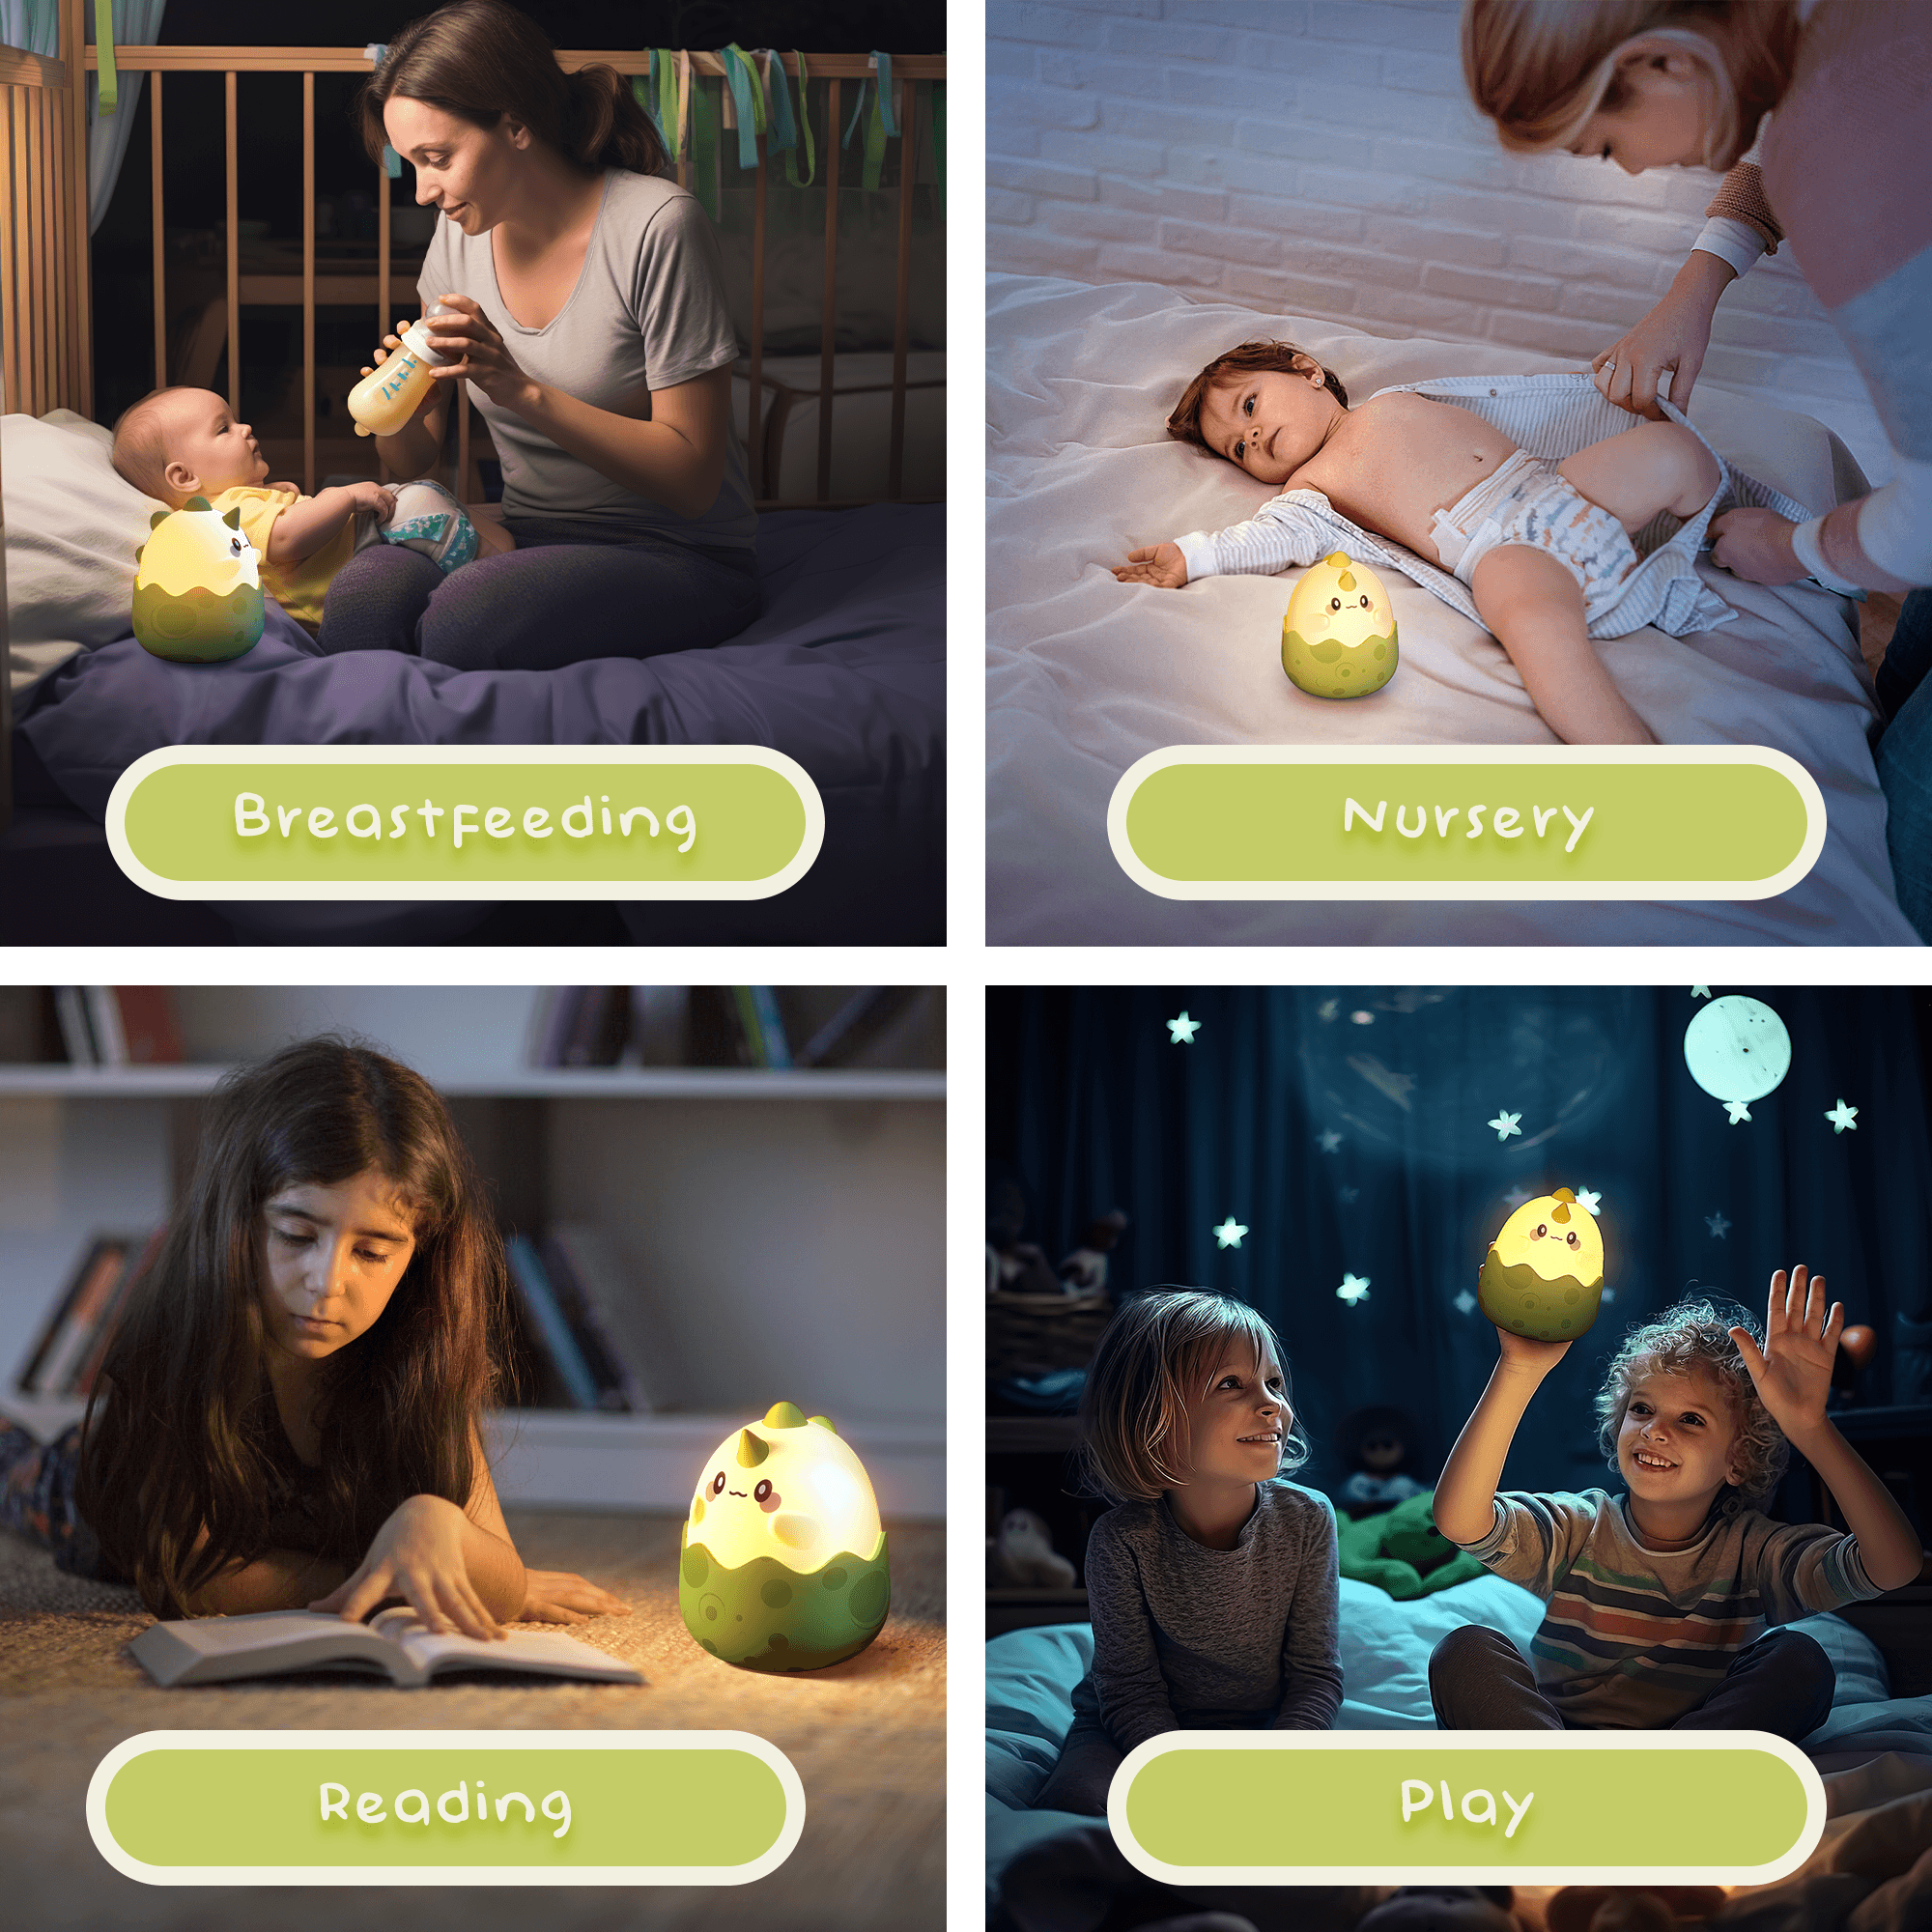 UNEEDE LED Dinosaurs Night Light,Cute Night Light for Kids, Kawaii Lamp for Bedroom Decor,Rechargeable Squishy Lamp with Touch Control for Teen Toddler Children Women Gift